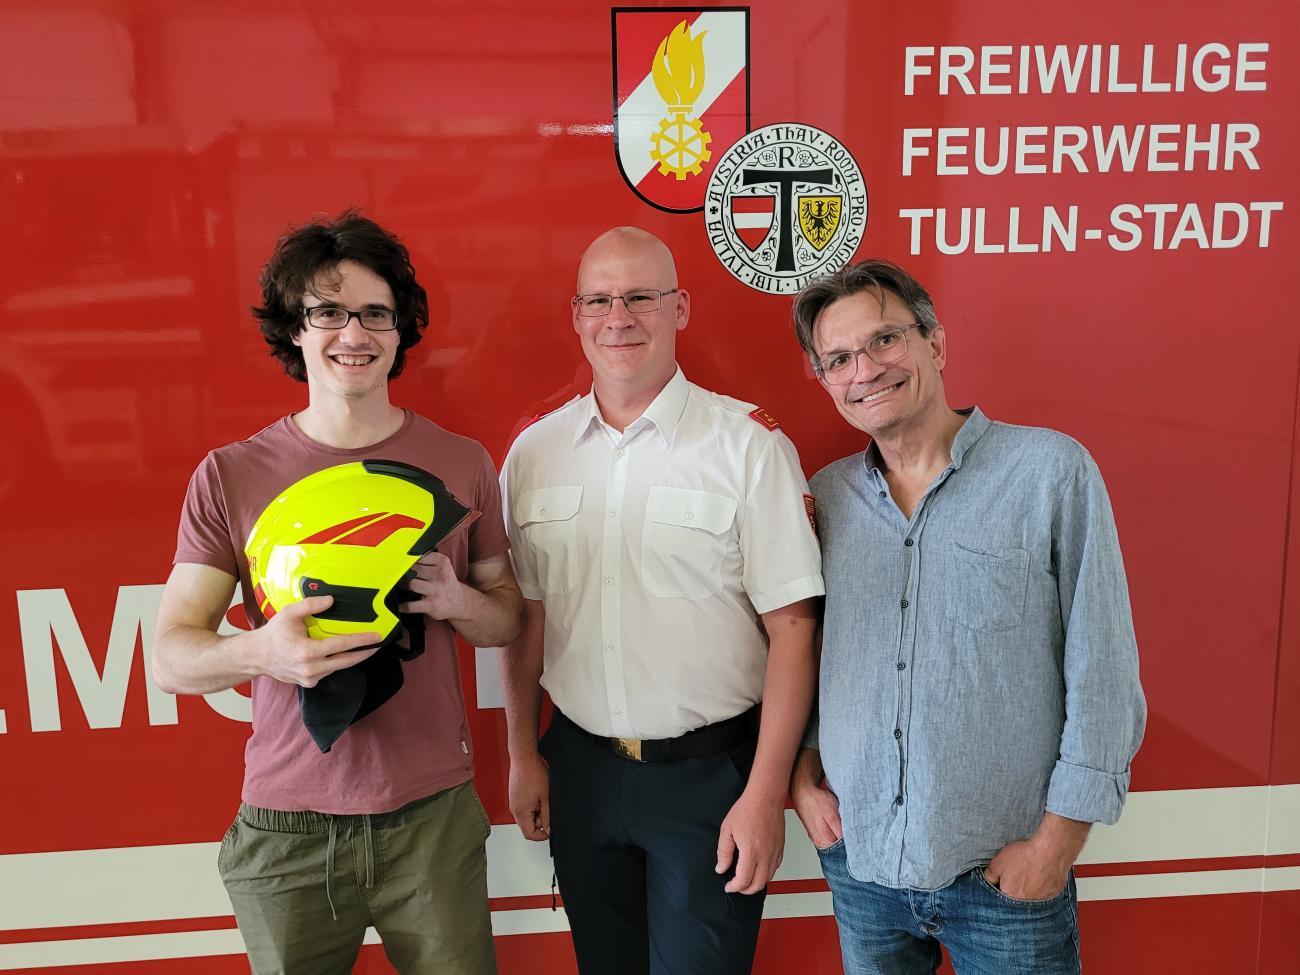 Lucas und Thomas (webshapers) with commander Ofner and the helmet